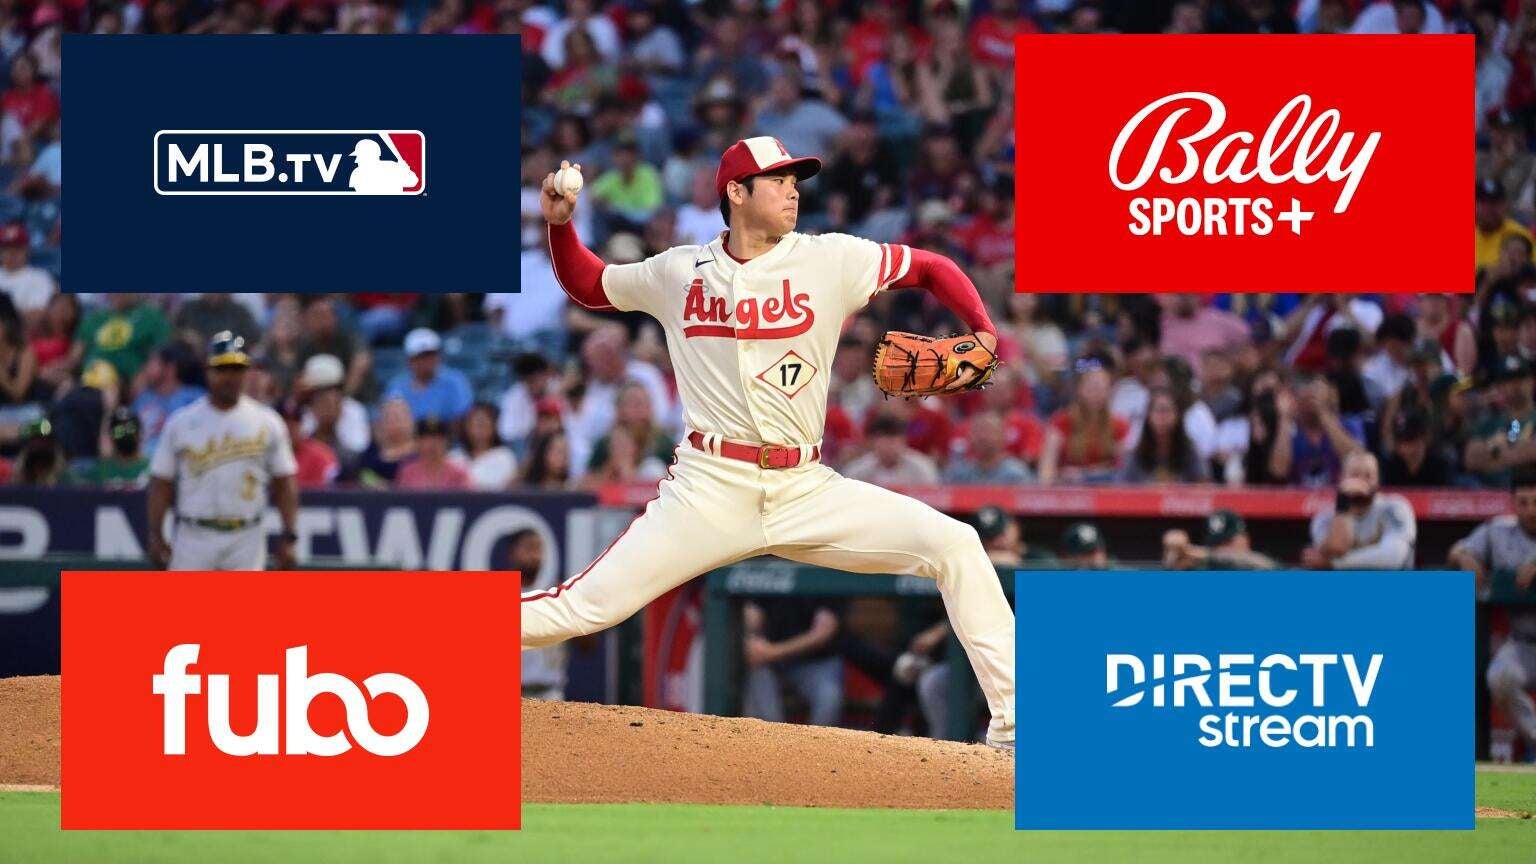 Sony Lands Live Streaming MLB Games on PlayStation 3